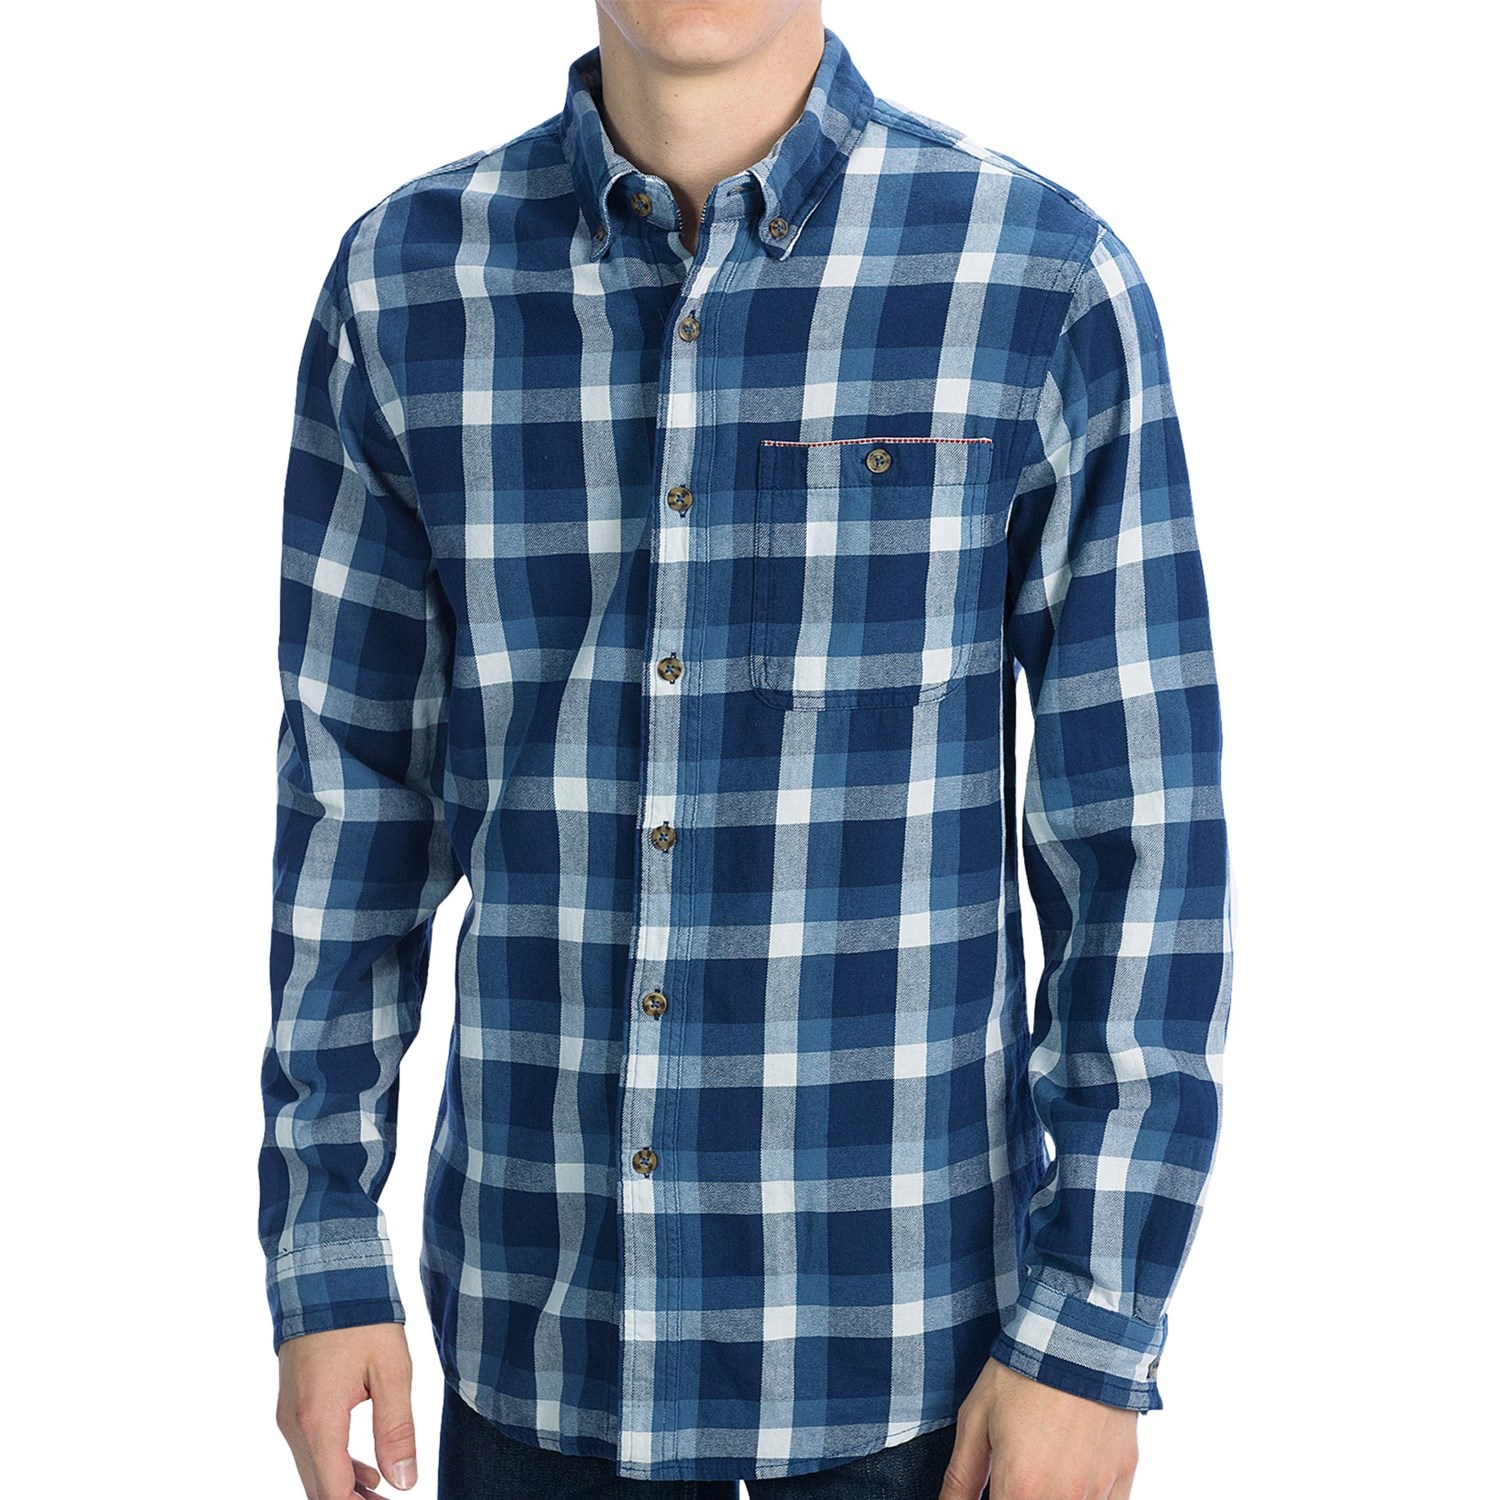 Boston Traders Flannel Shirt (For Men) 7735M - Save 64%